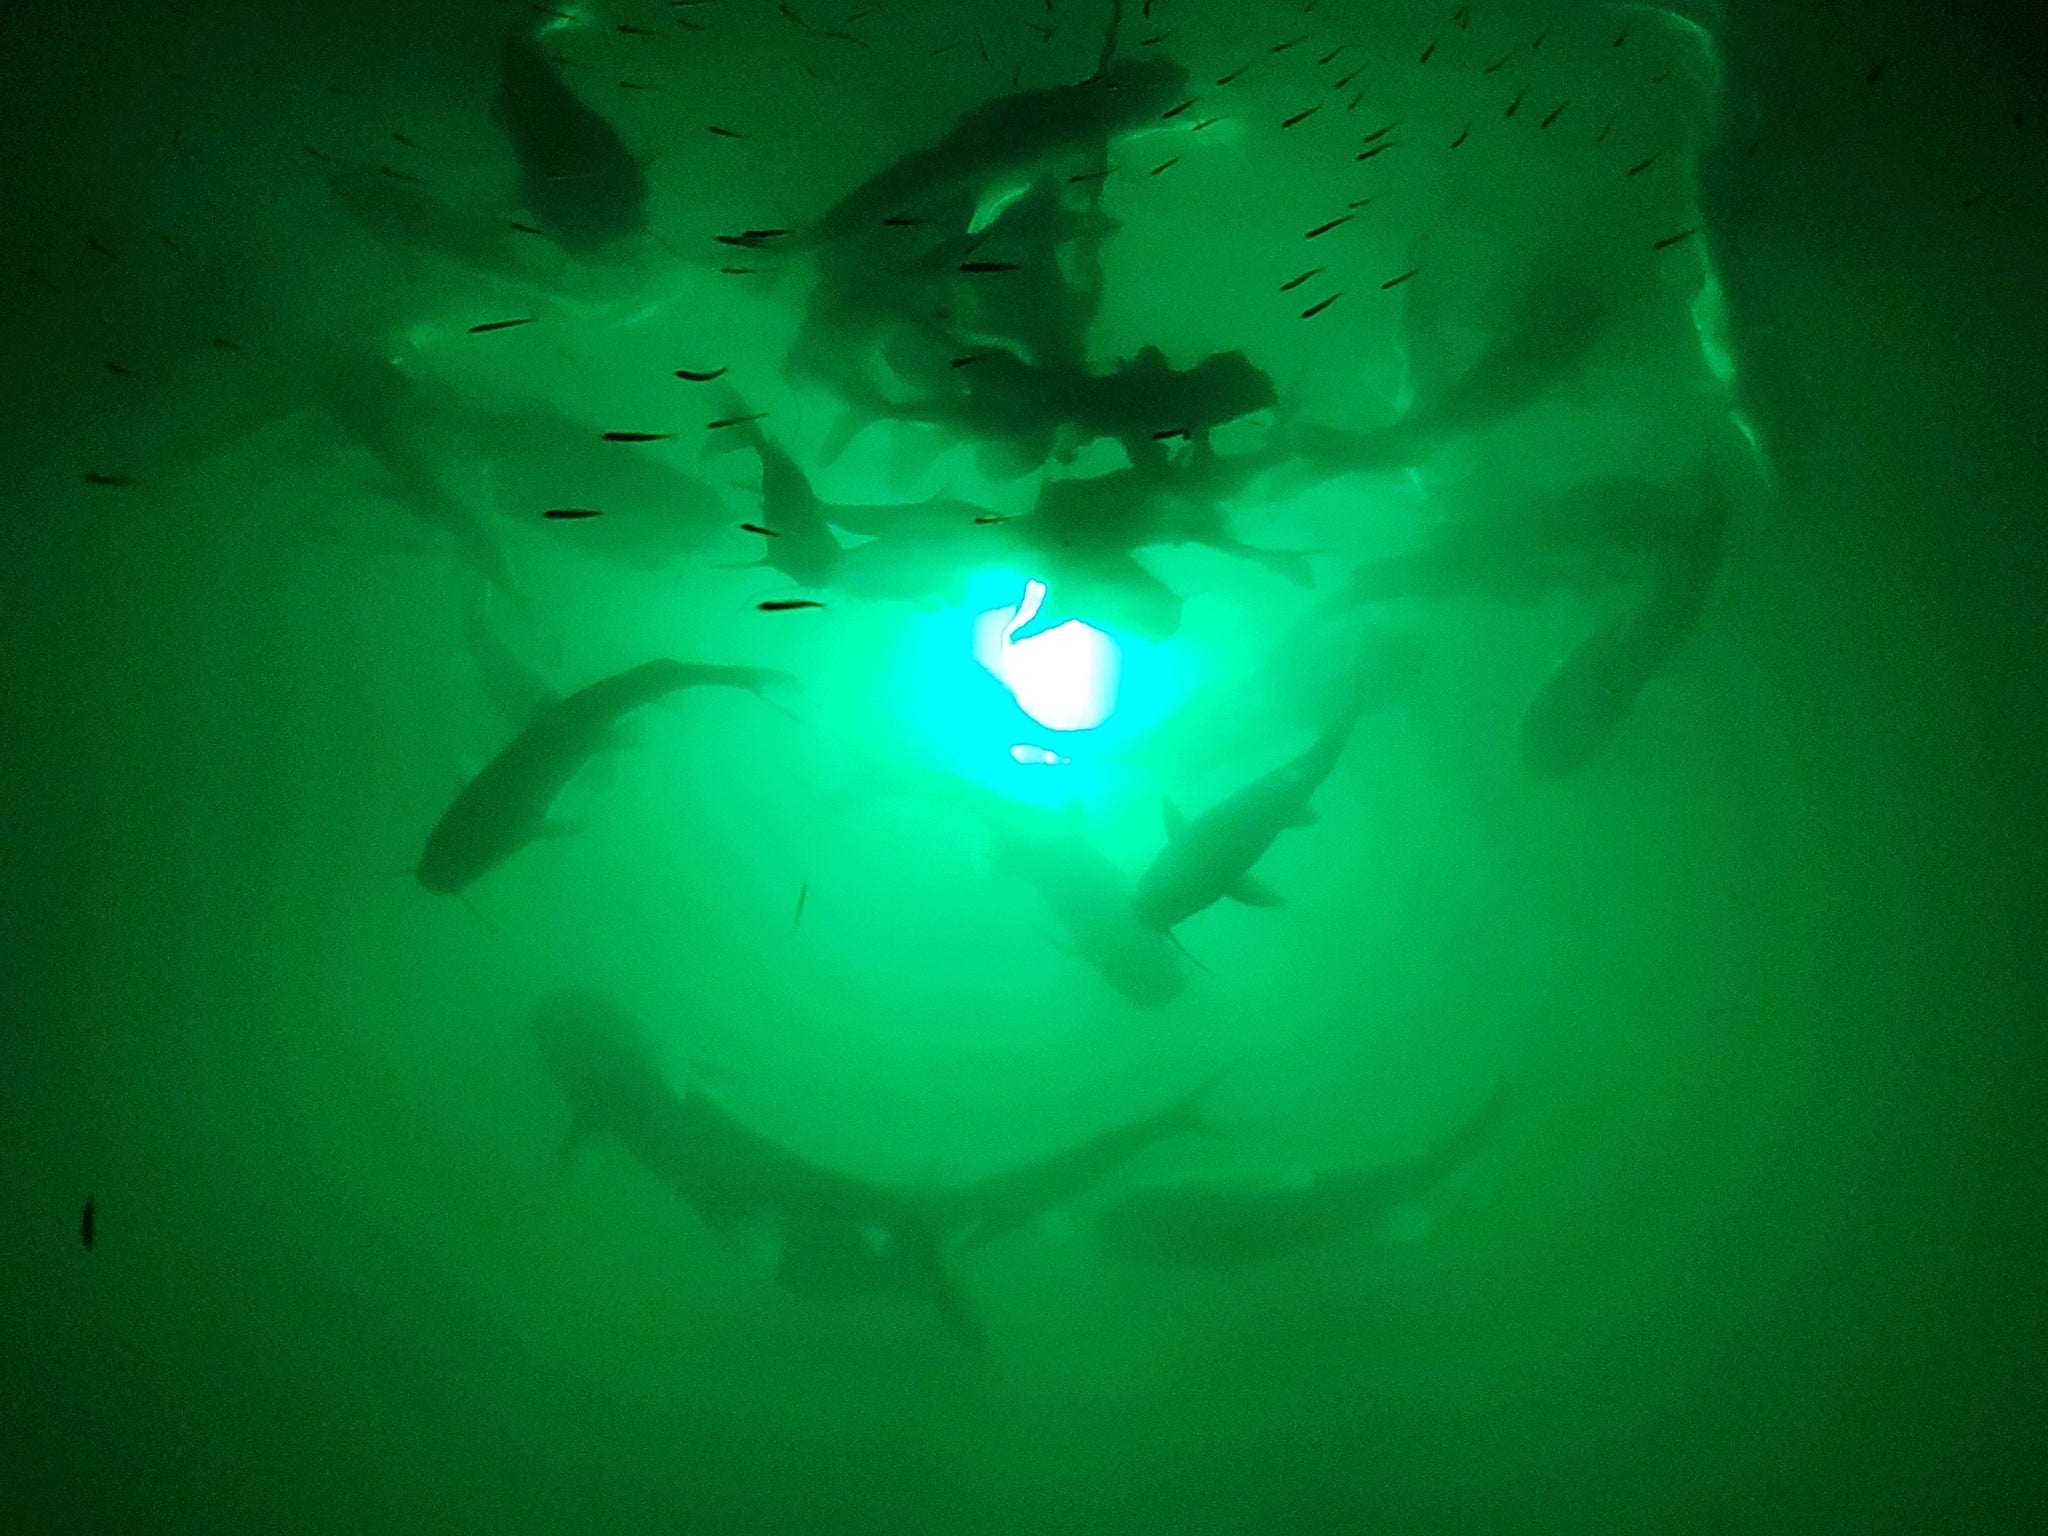 Overhead Lights – Tagged above water– Under Water Green Fishing Lights